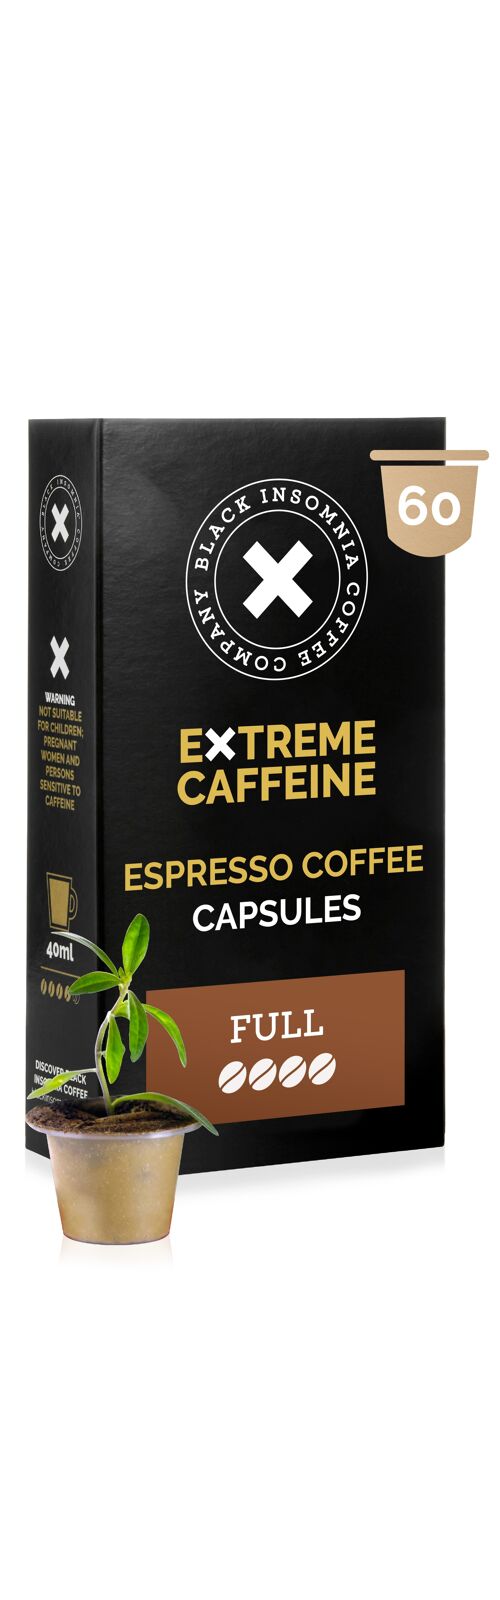 Nespresso© Compatible Pods FULL Flavour by Black Insomnia, 60 pods à 5g, Strong Coffee, Extreme Caffeine